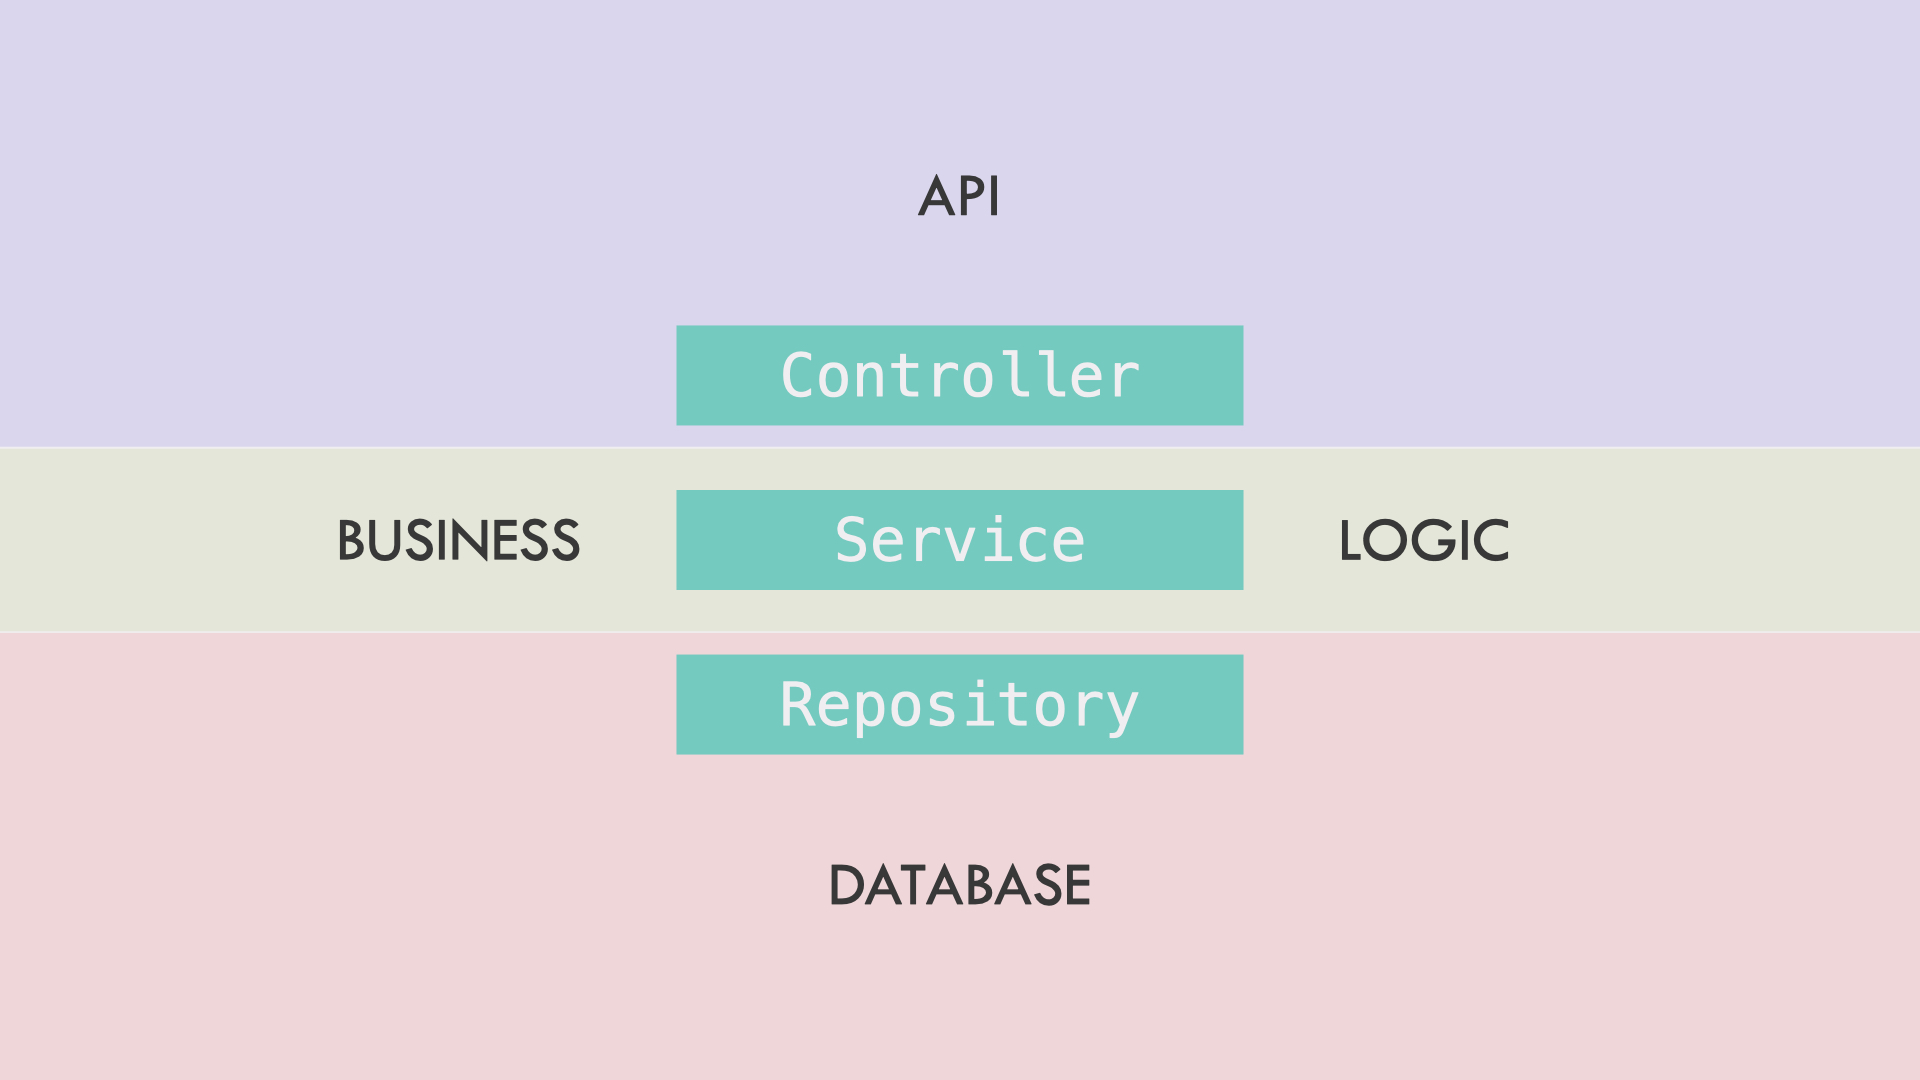 Spring Boot Application architecture